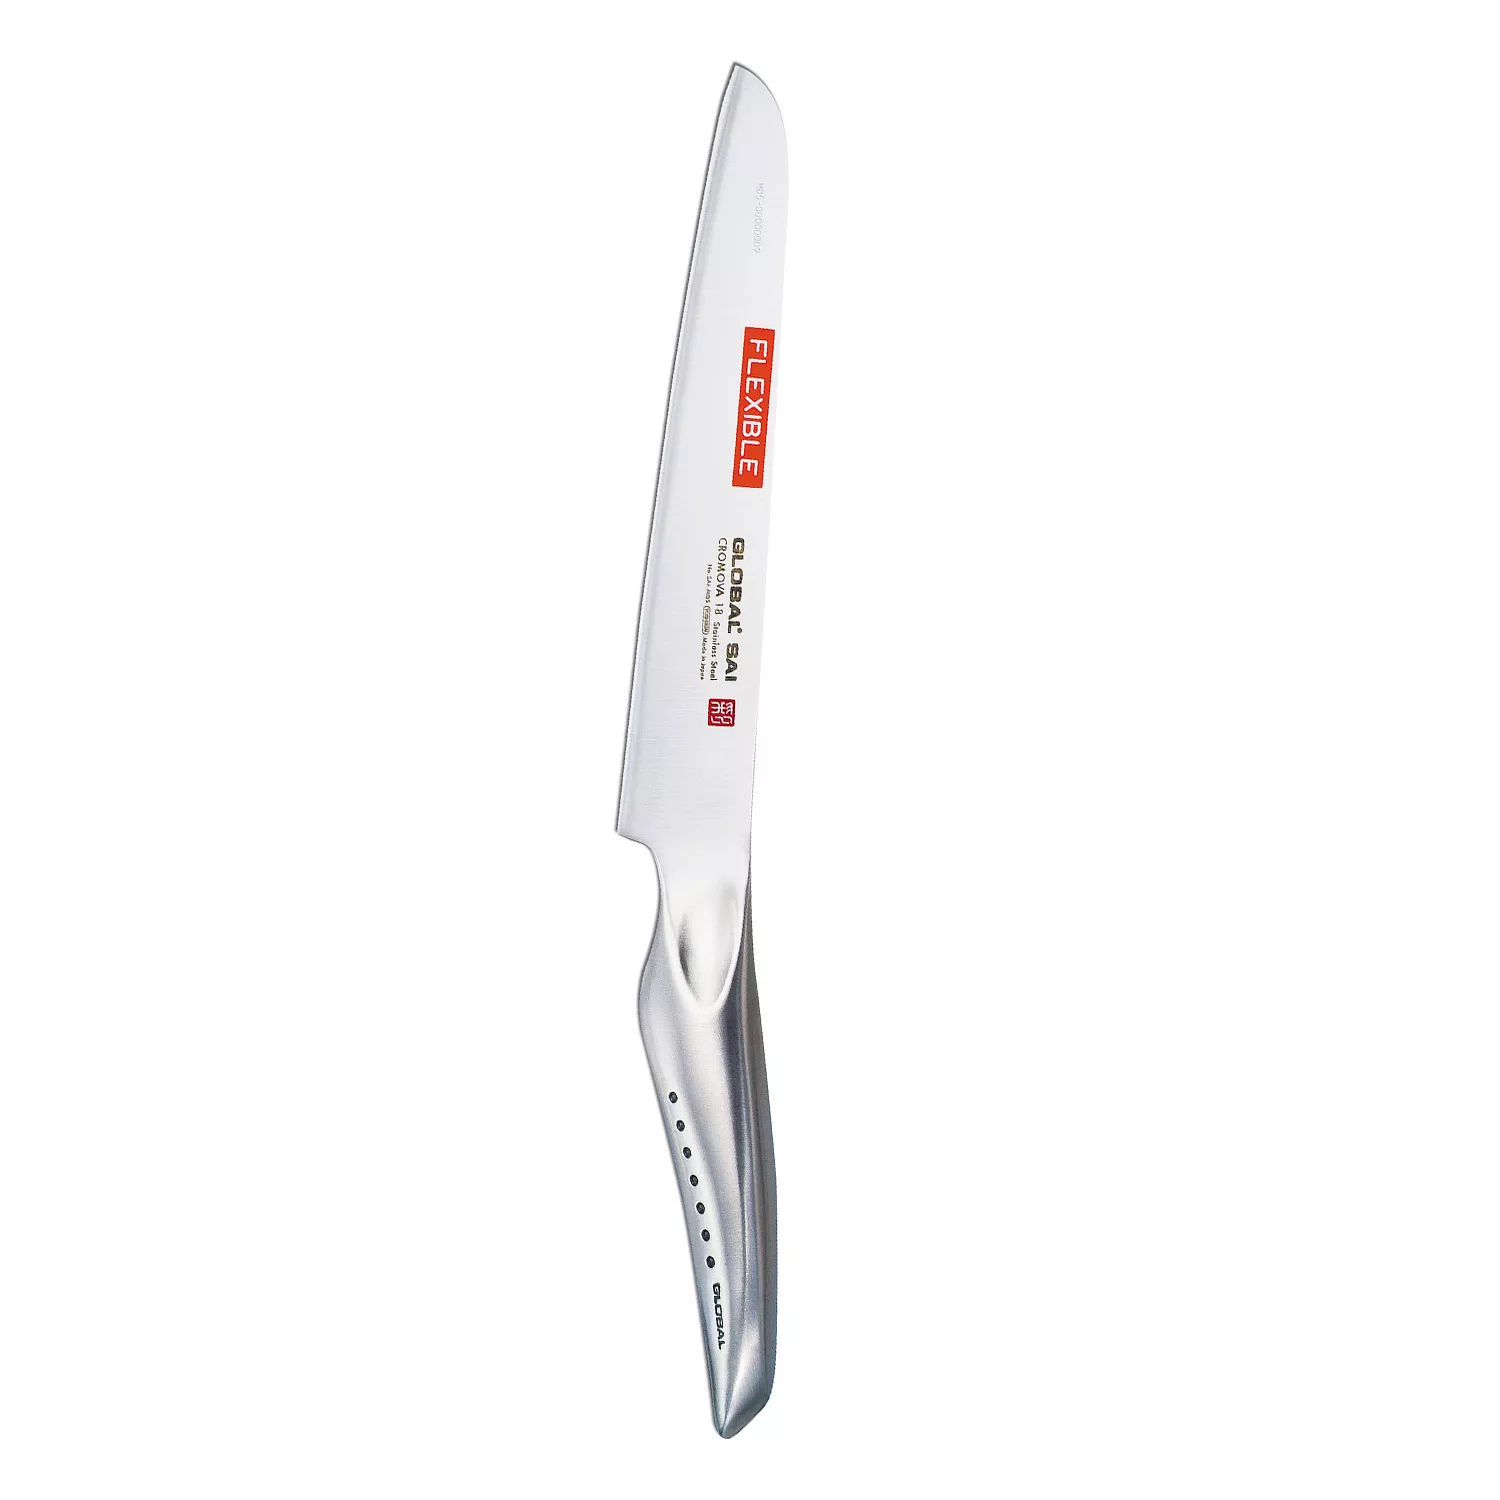 BergHOFF Balance Non-stick Stainless Steel Vegetable Knife 4.5